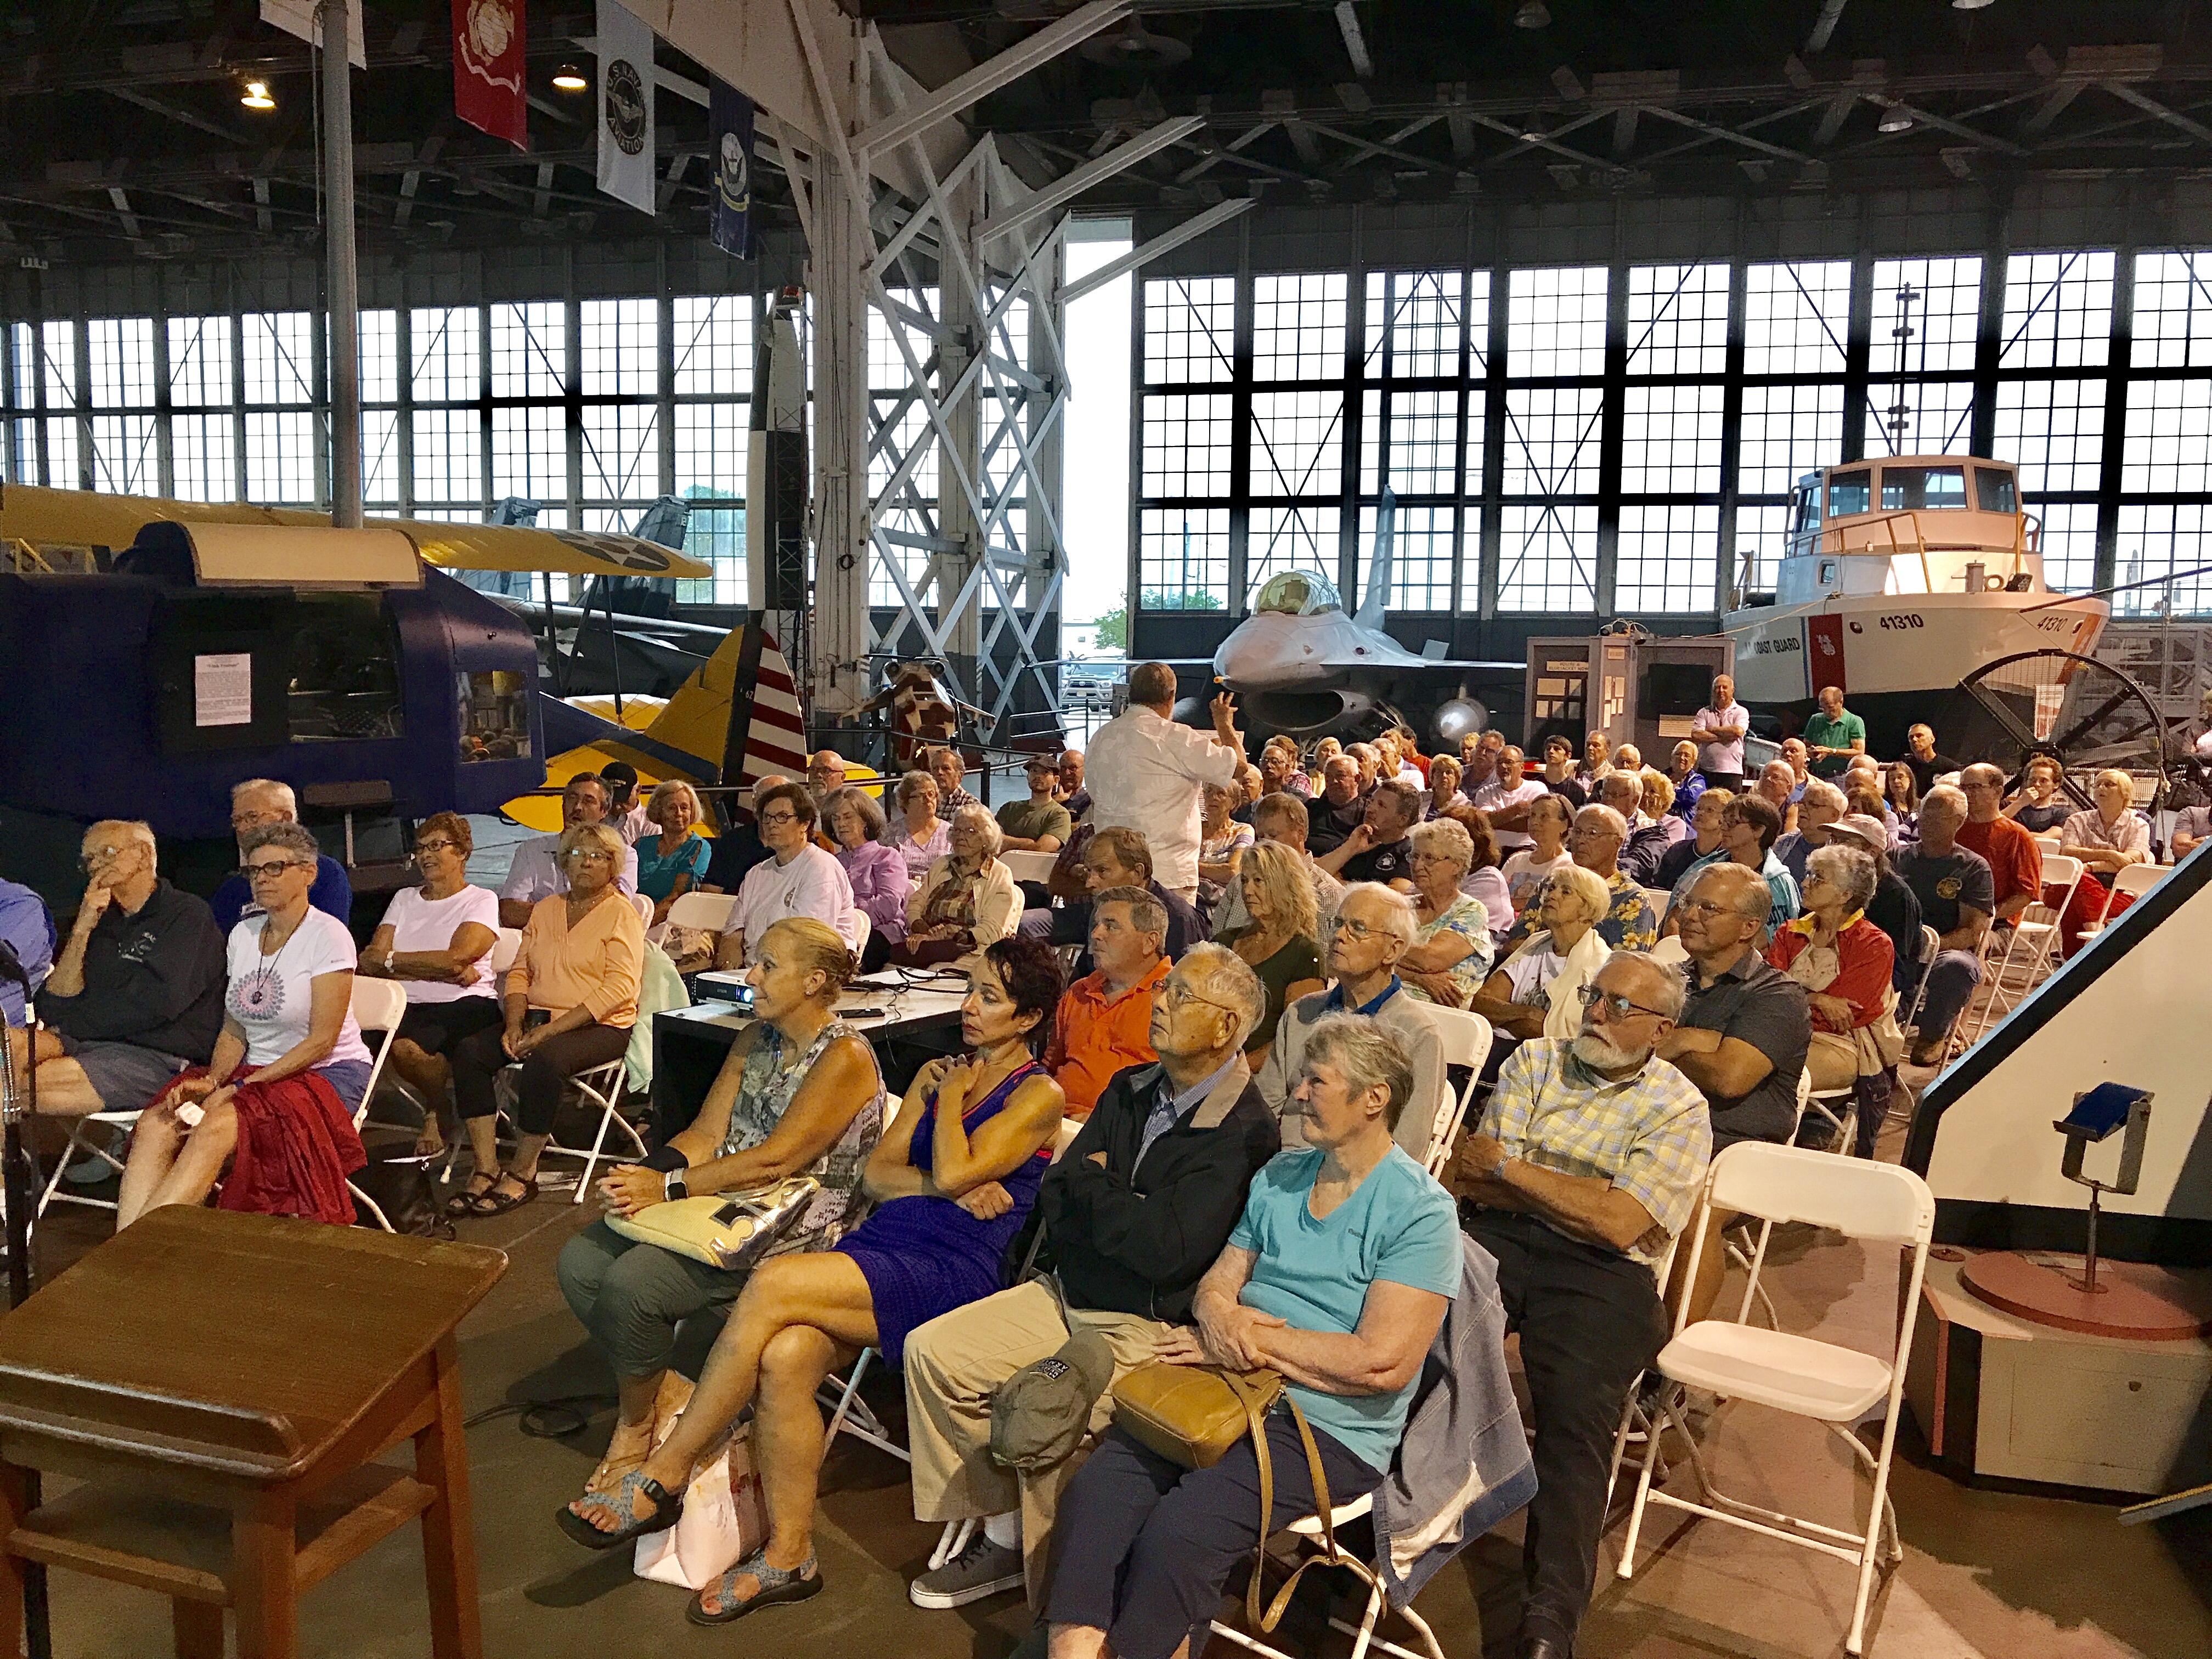 Dr. Robert Heinly in the crowd of almost 100 listeners during his lecture on defending Cape May during WWII.